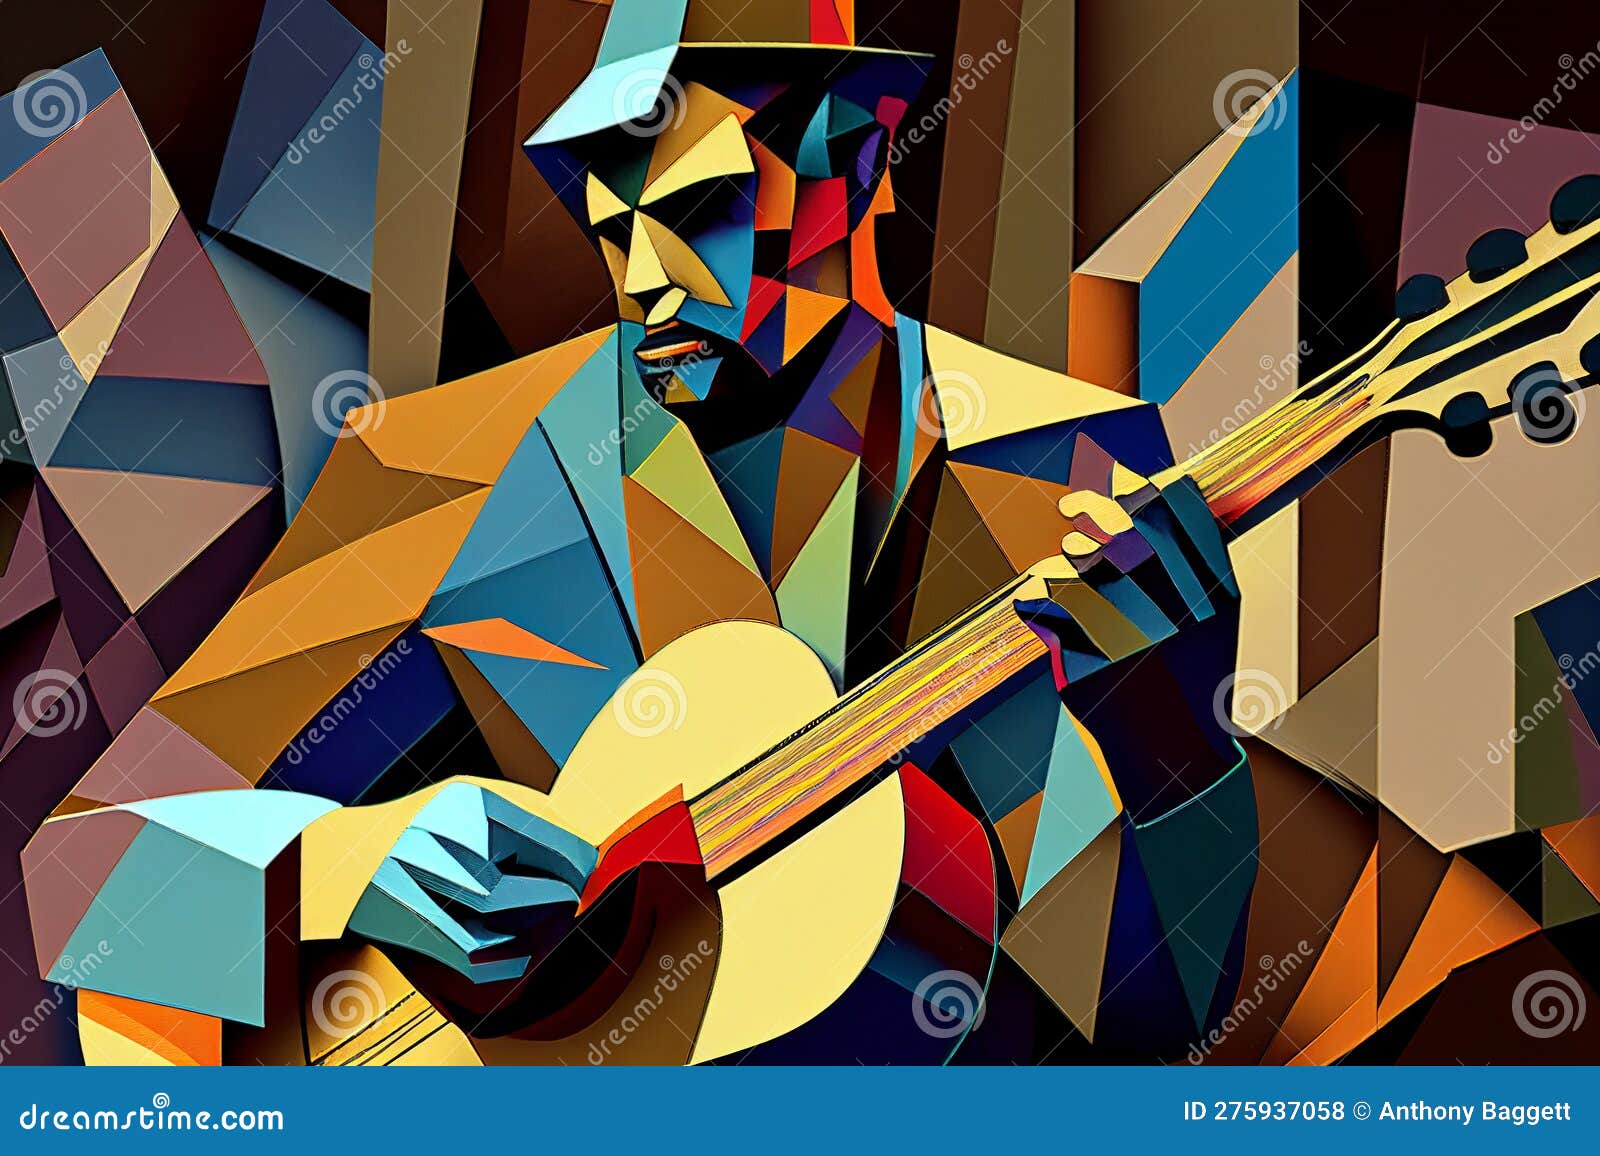 afro-american male musician guitarist playing a guitar in an abstract cubist style painting